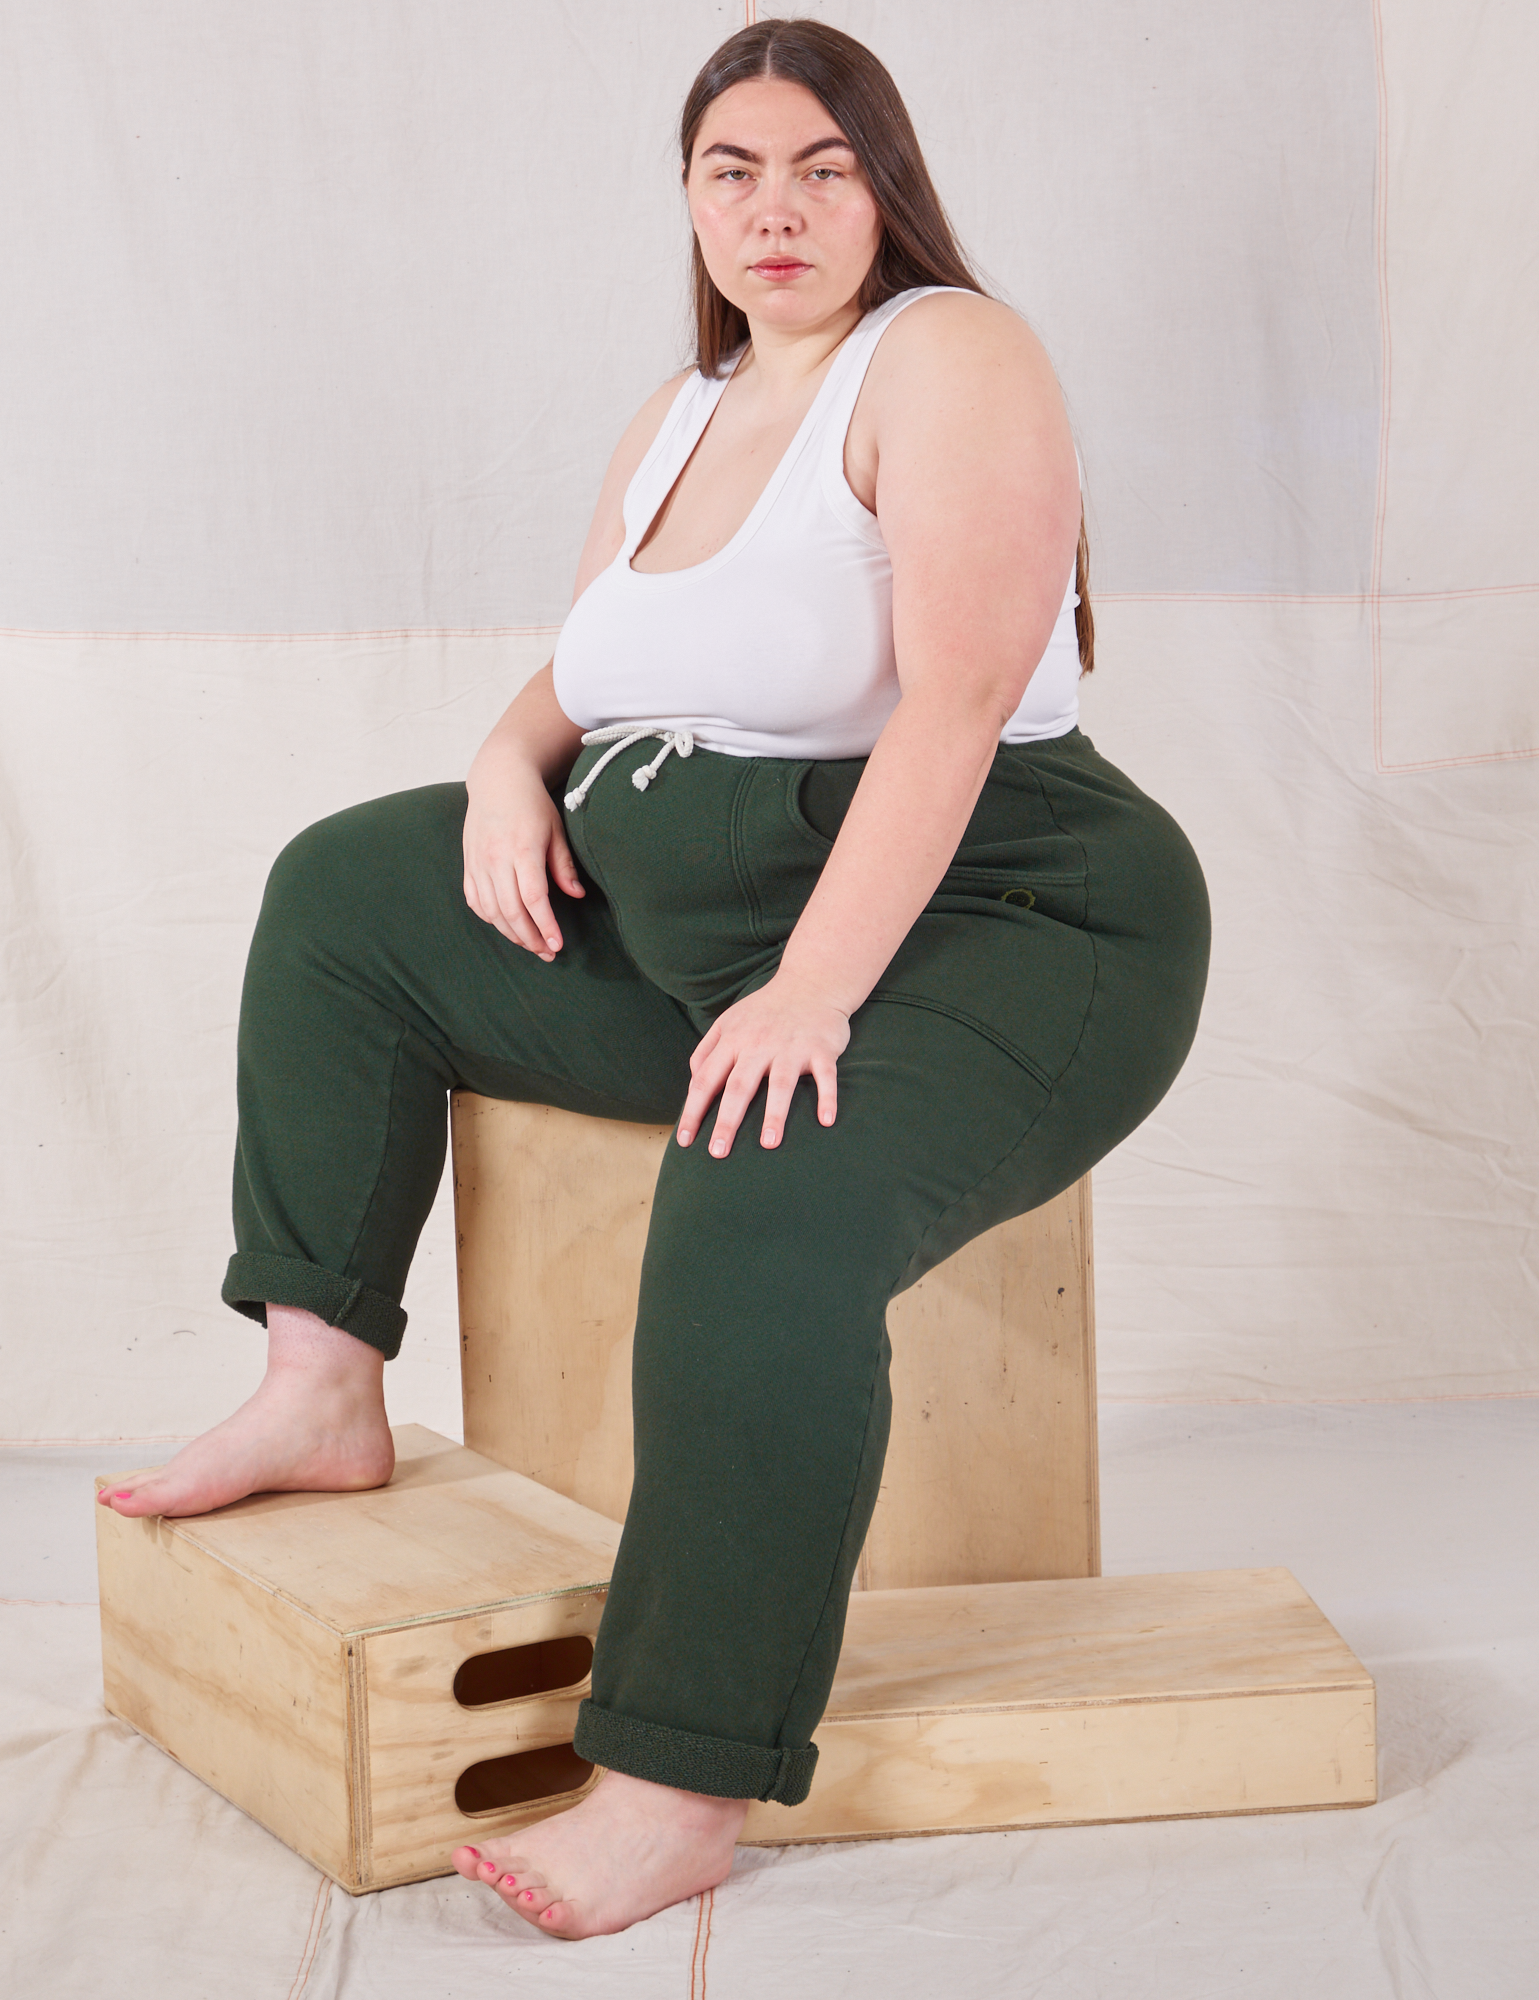 Marielena is wearing Rolled Cuff Sweat Pants in Swamp Green and vintage off-white Cropped Tank Top